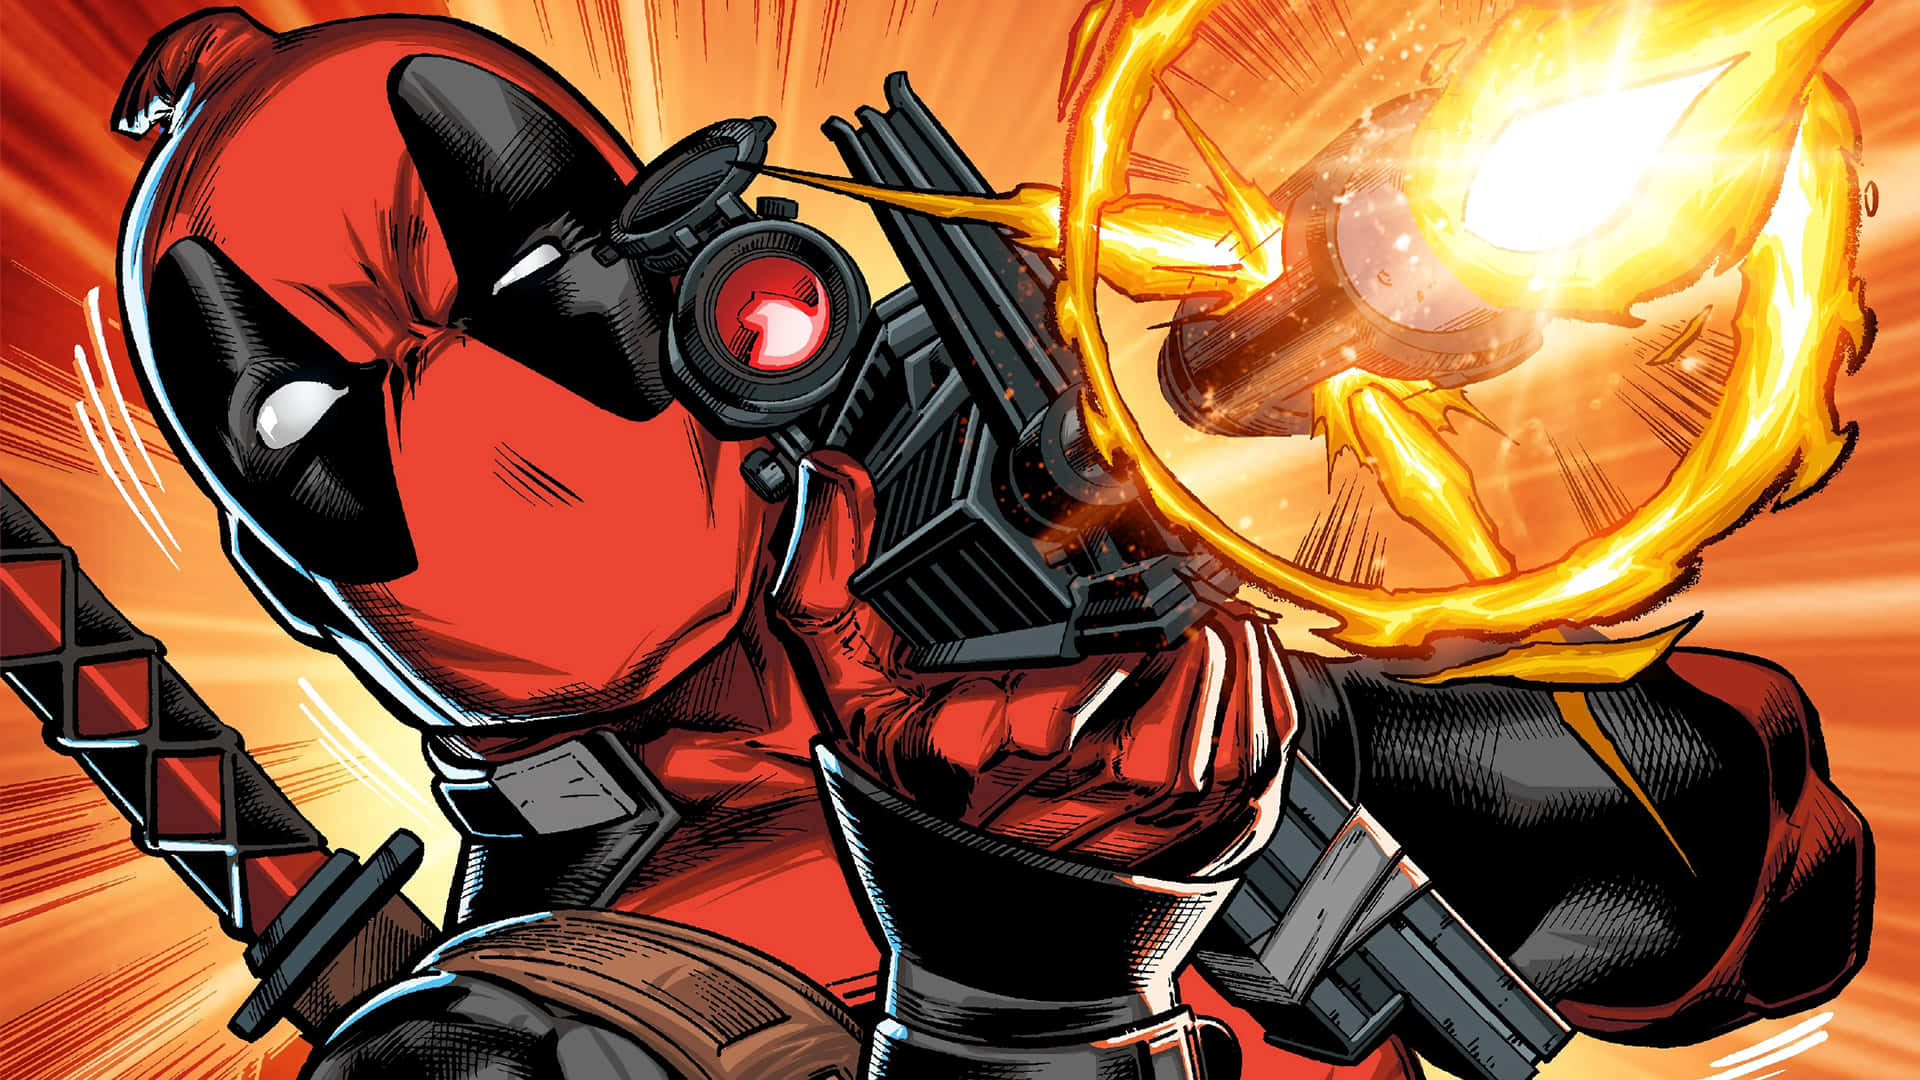 Deadpool with his catchphrase, "Chimichangas anyone?"